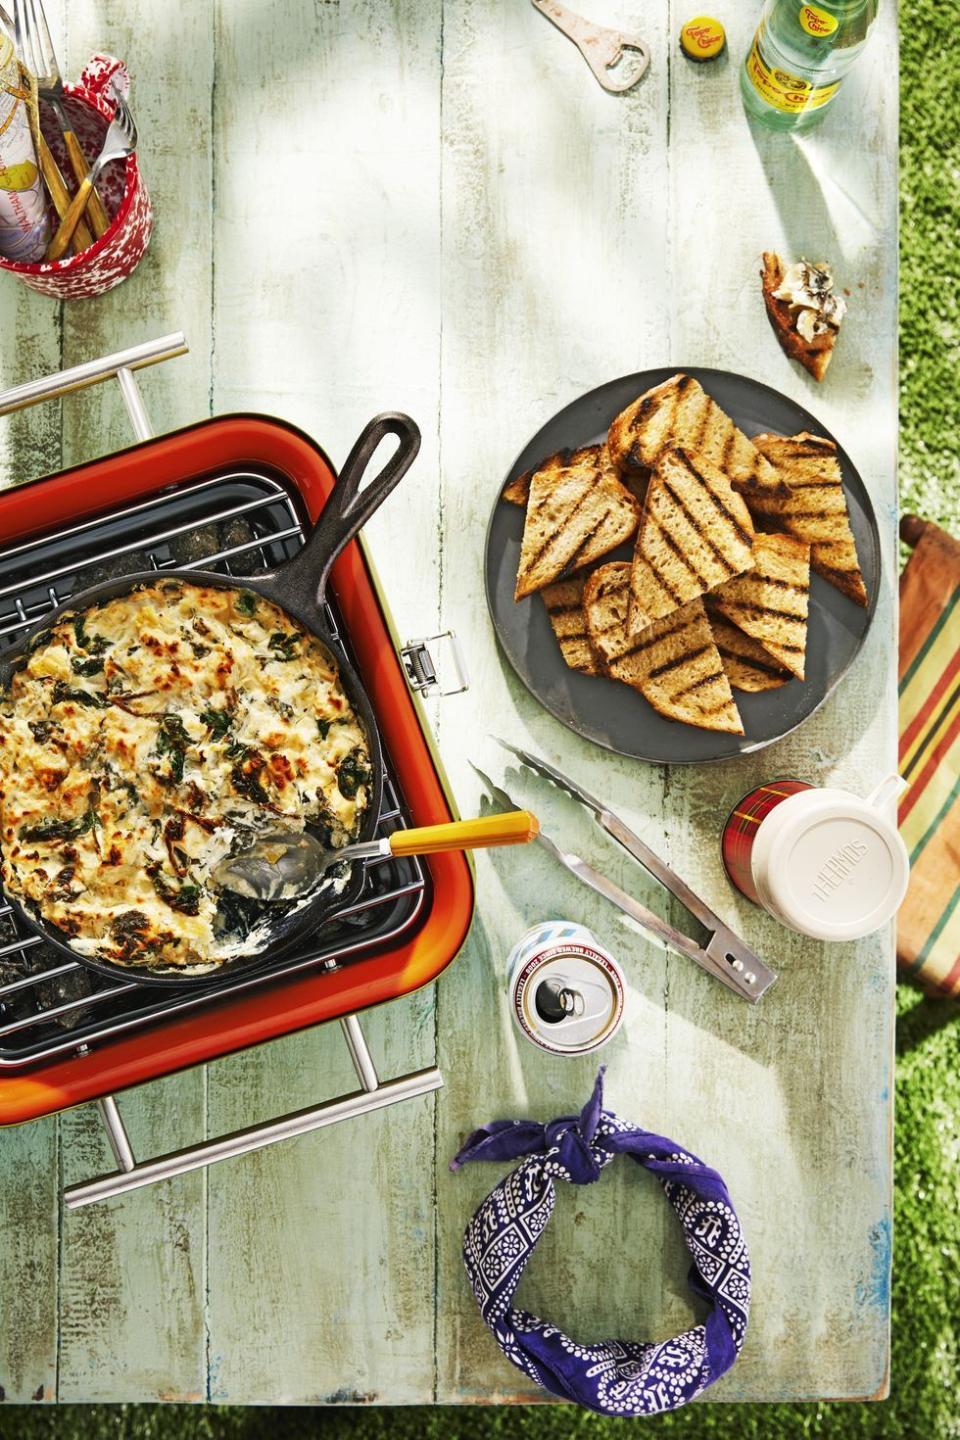 Ensure No One Goes Hungry with These Meatless Super Bowl Recipes